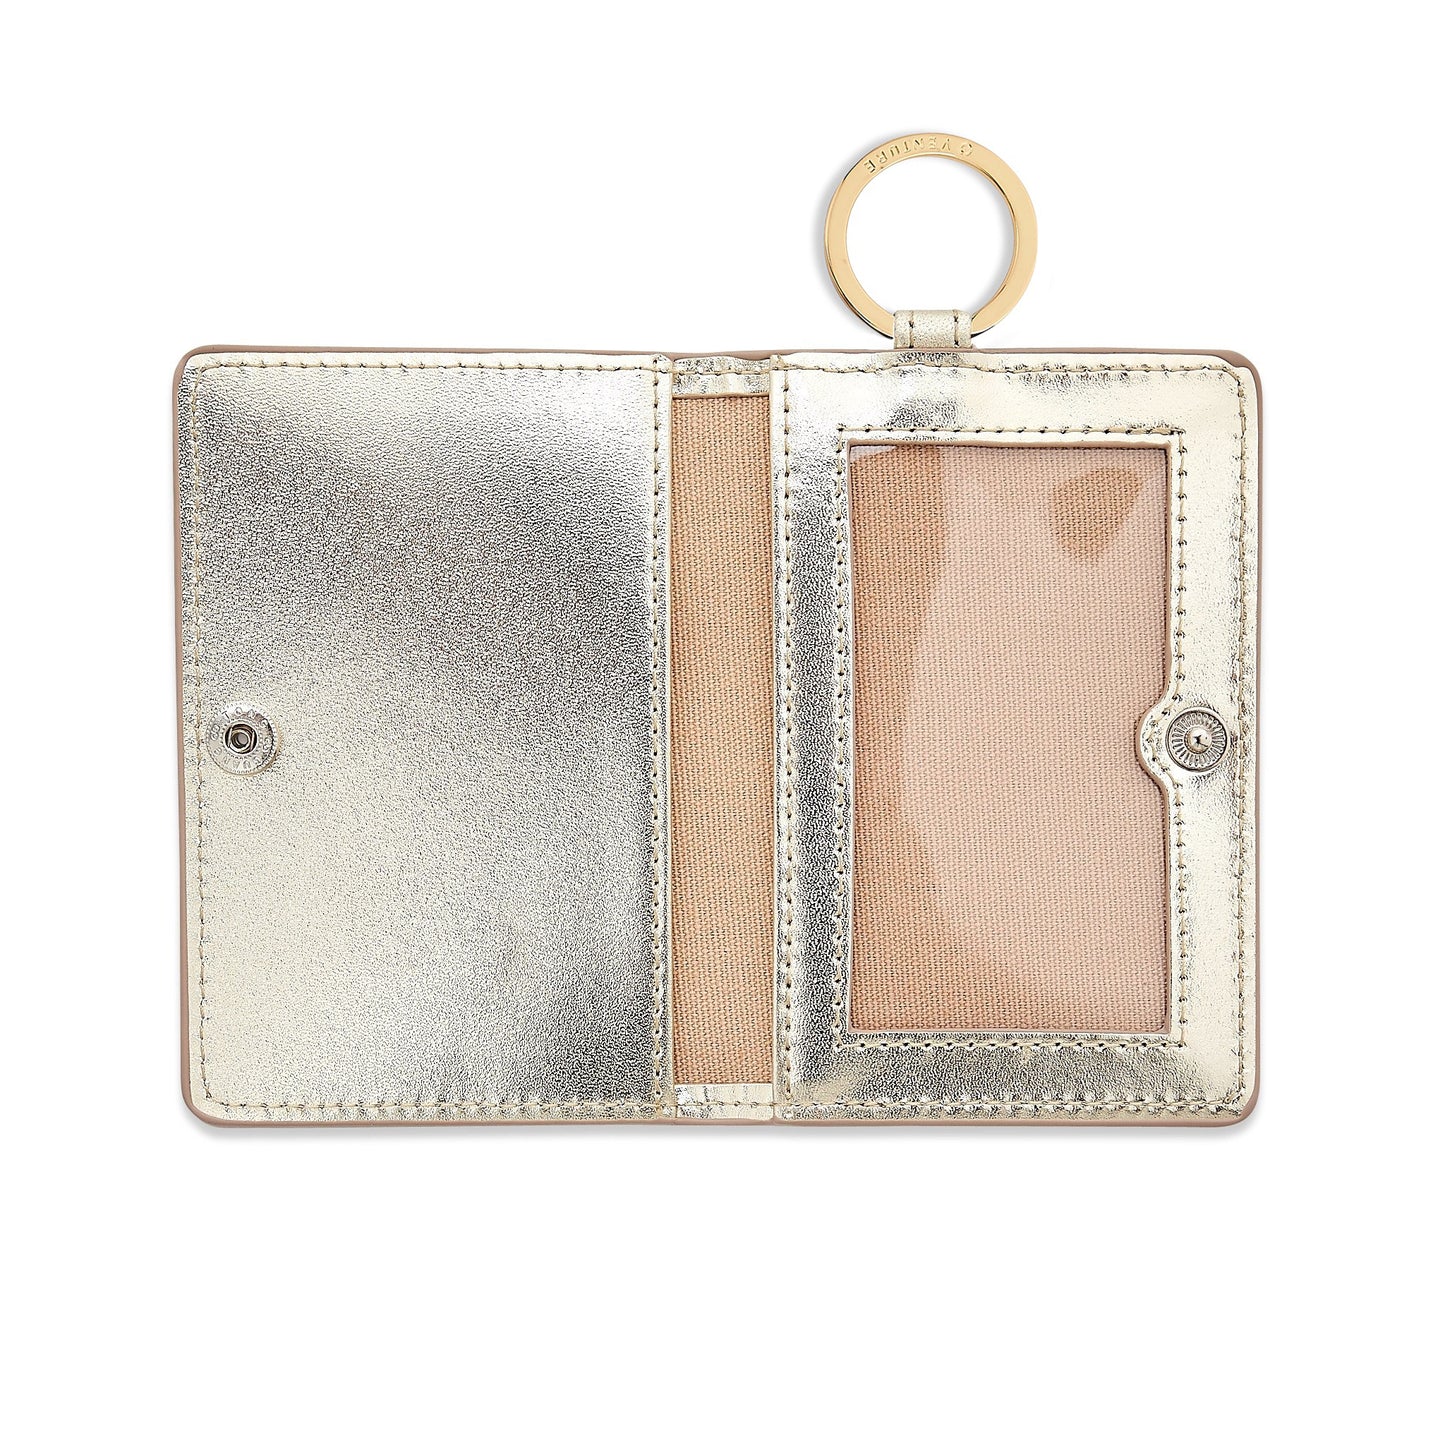 Id gold wallet with clear outer window, and clear inner window for id holder. Room for cards and cash